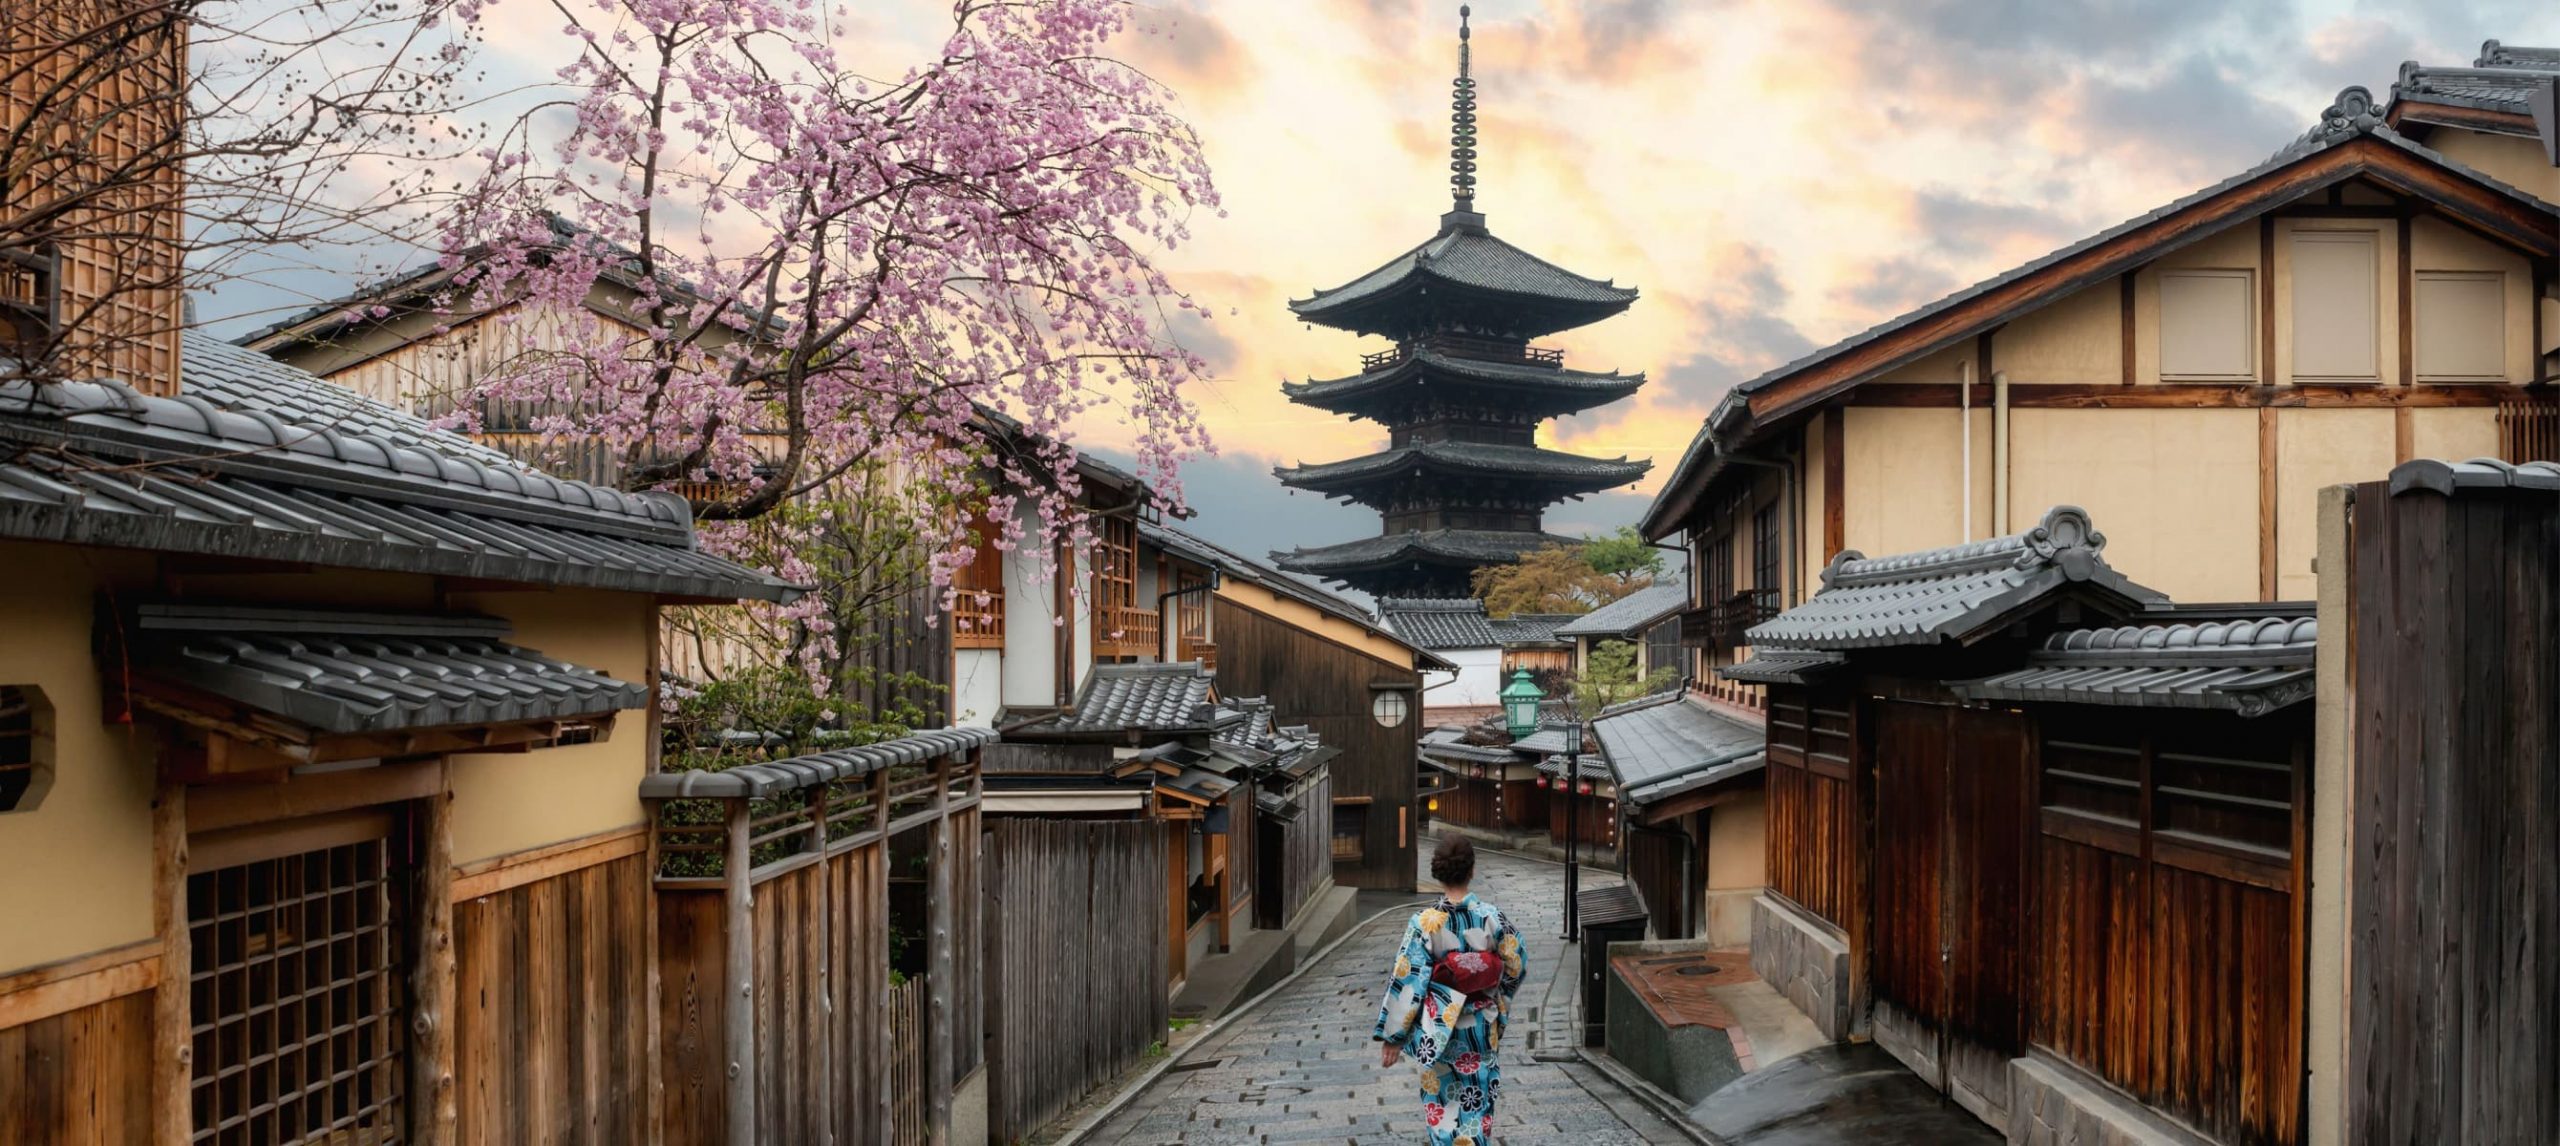 The 10 Best Tourist Attractions In Japan